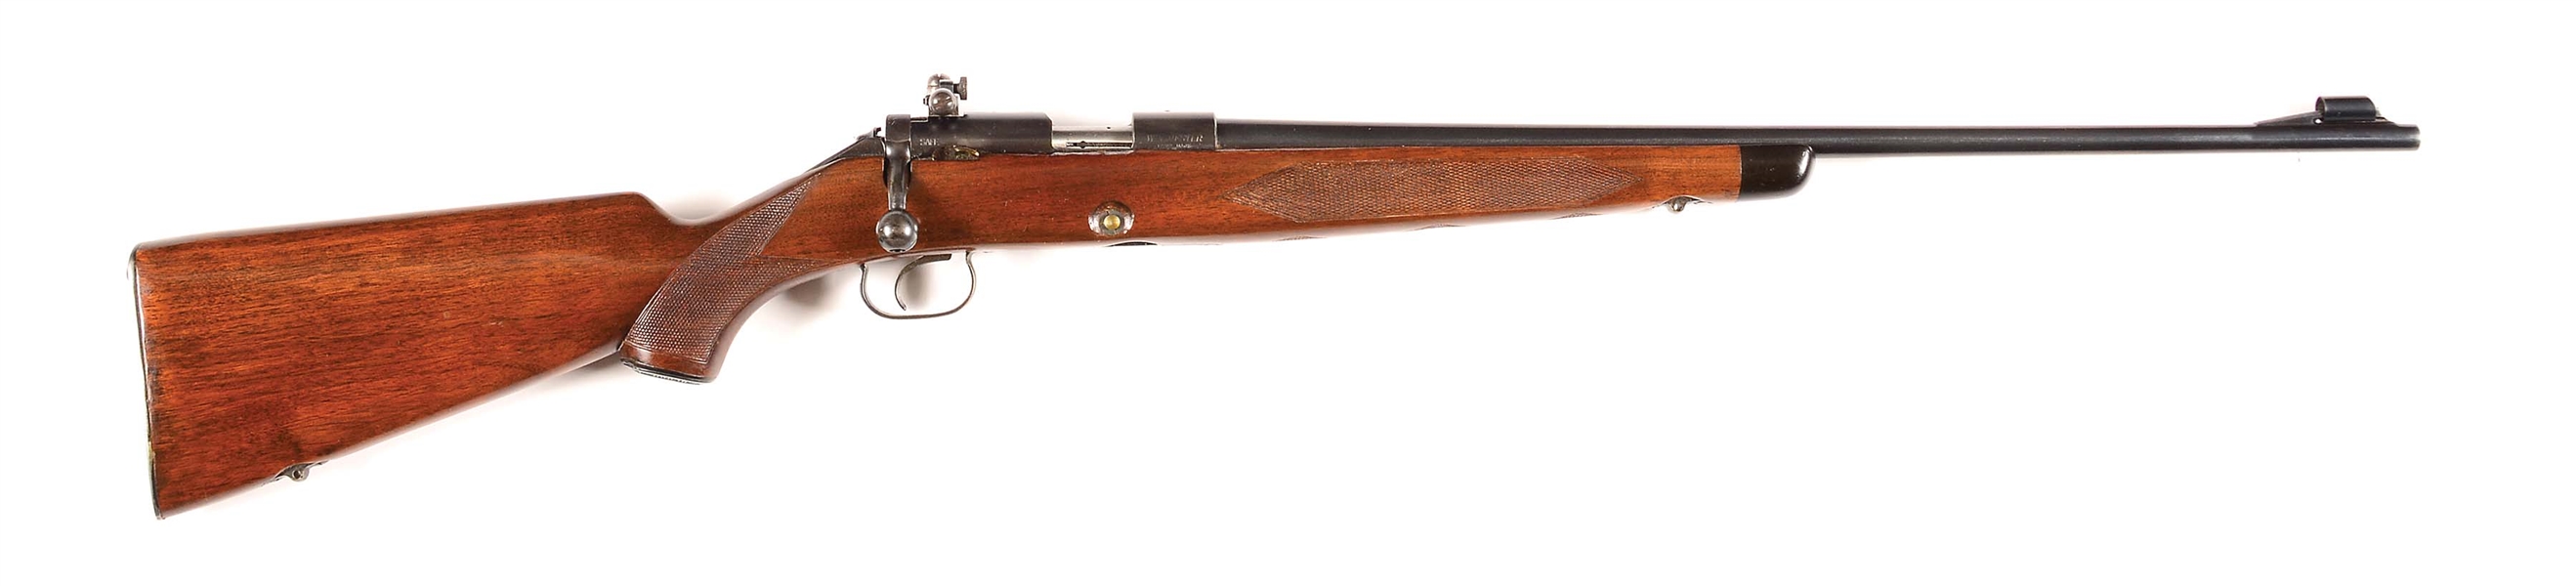 (C) WINCHESTER MODEL 52 "B" SPORTING BOLT ACTION RIFLE.